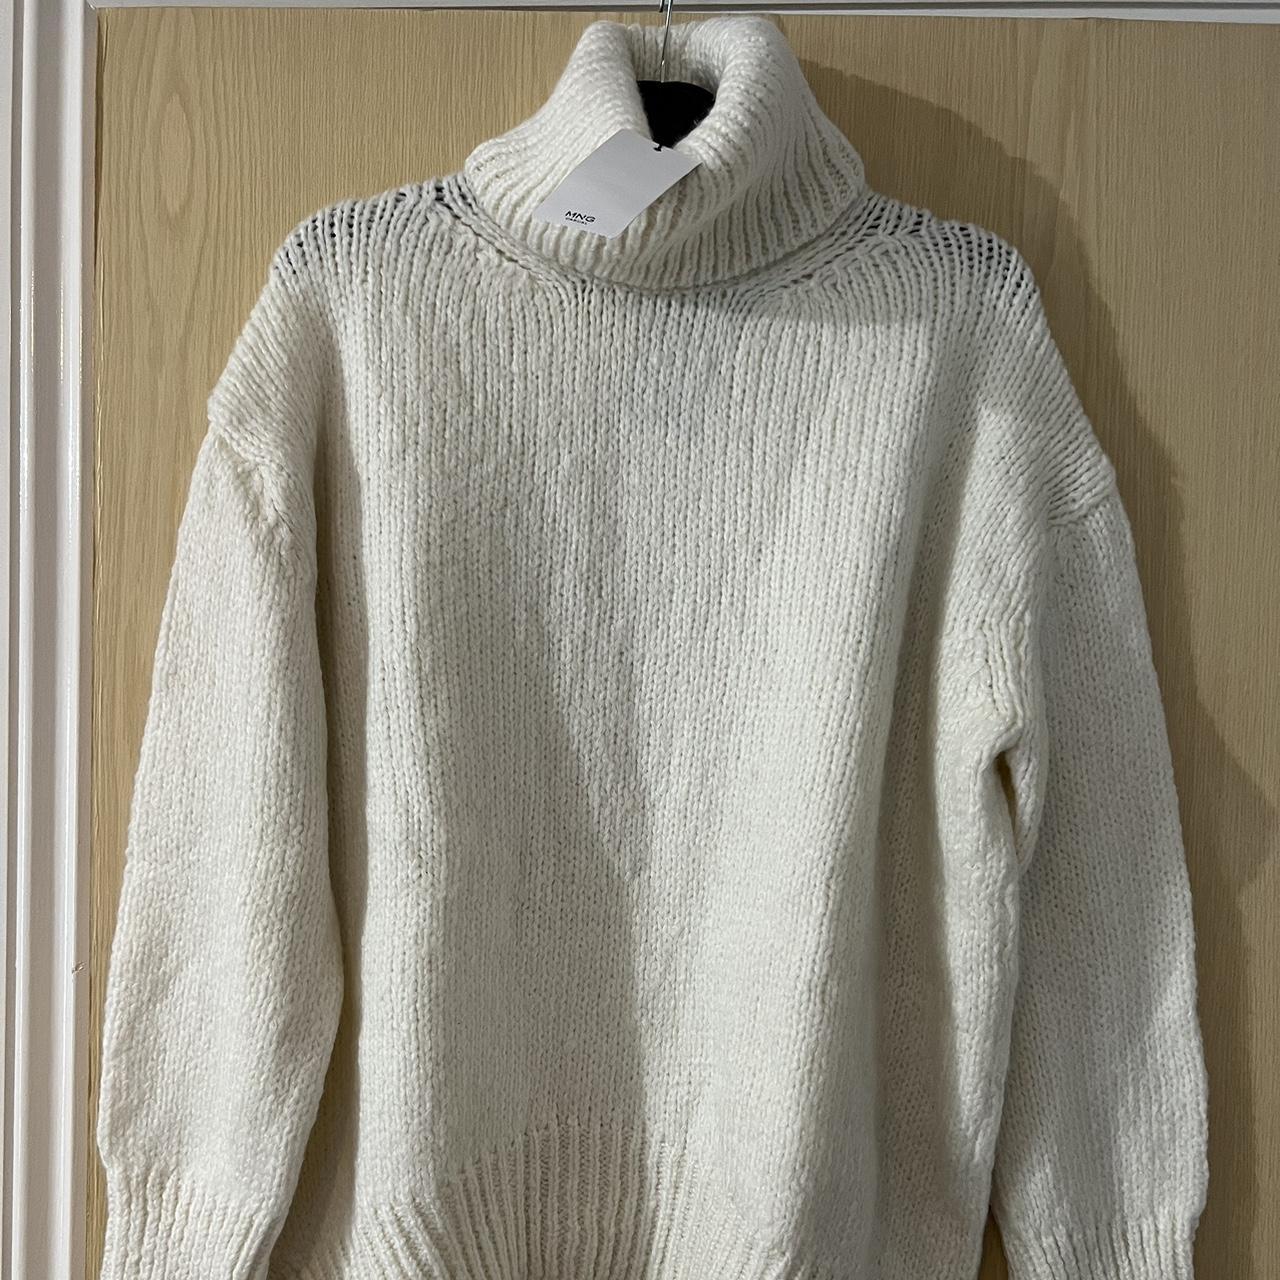 Oversized mango jumper. New with tags. - Depop